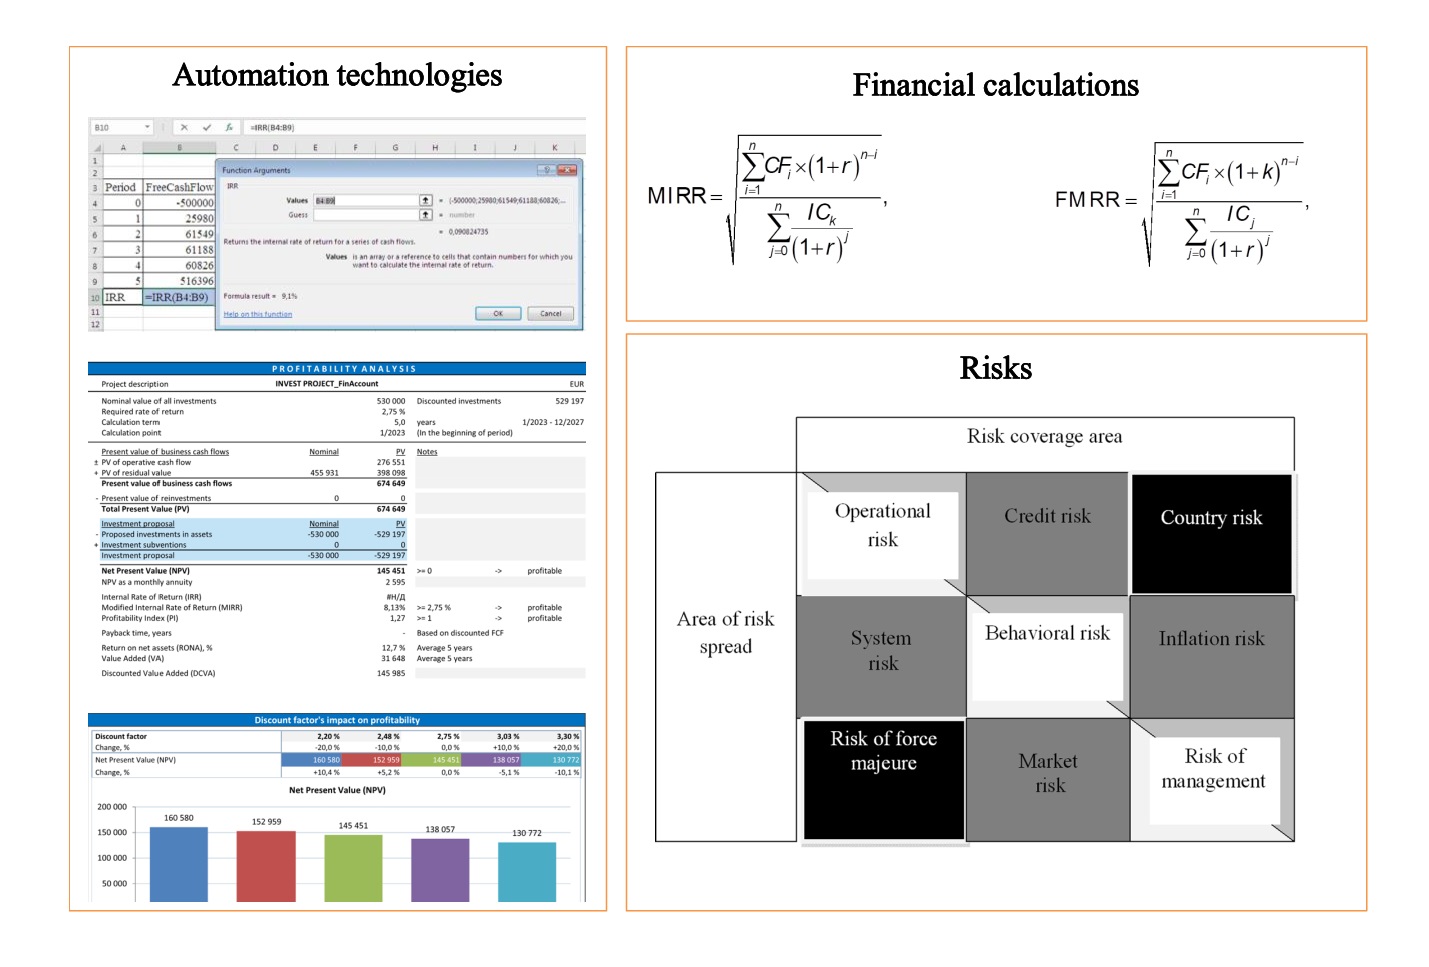 Optimization of business processes in investment using automation technology, financial calculations, and risk assessment methods